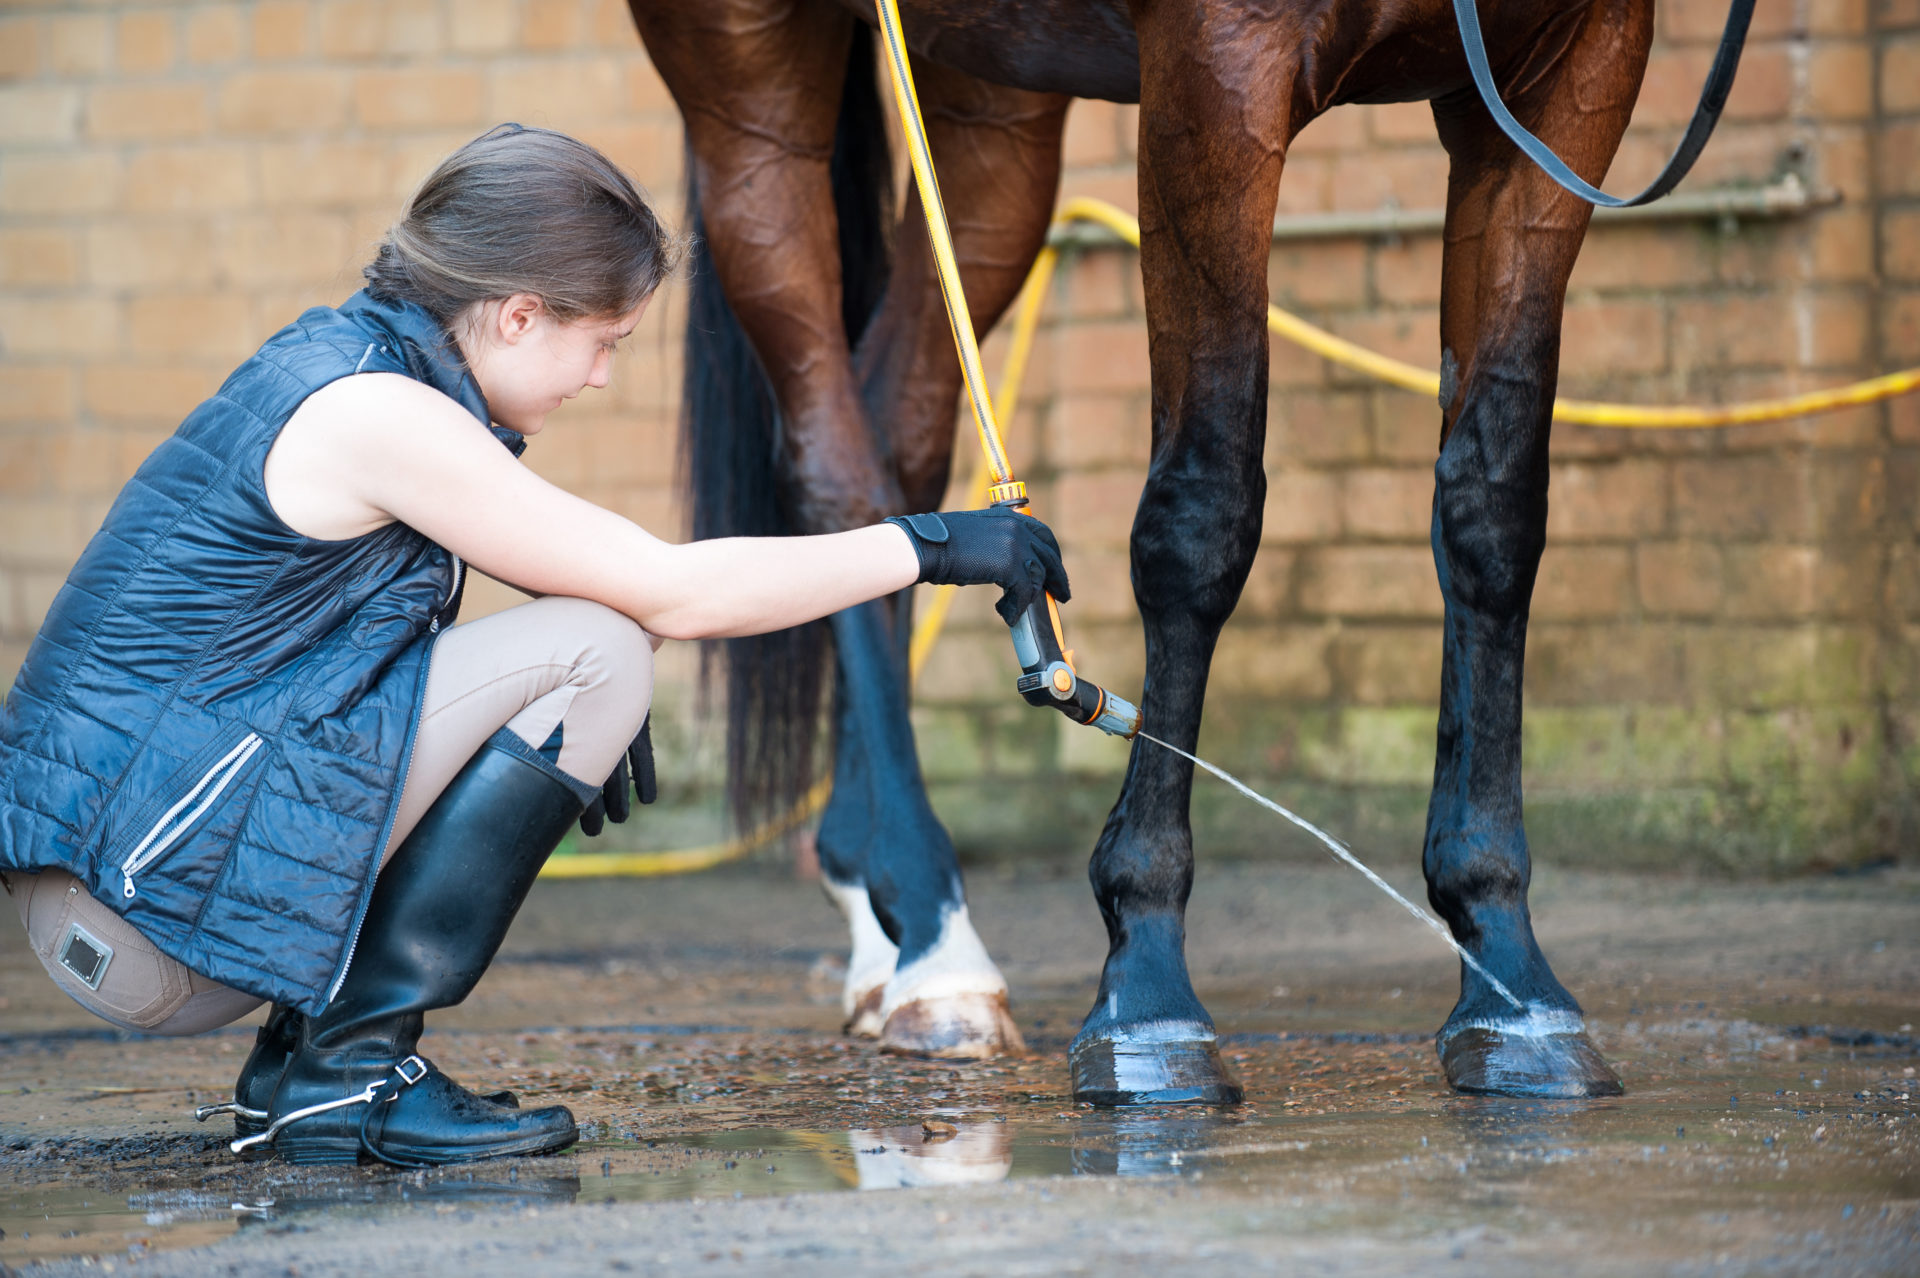 Photograph of a lady cleaning a horse